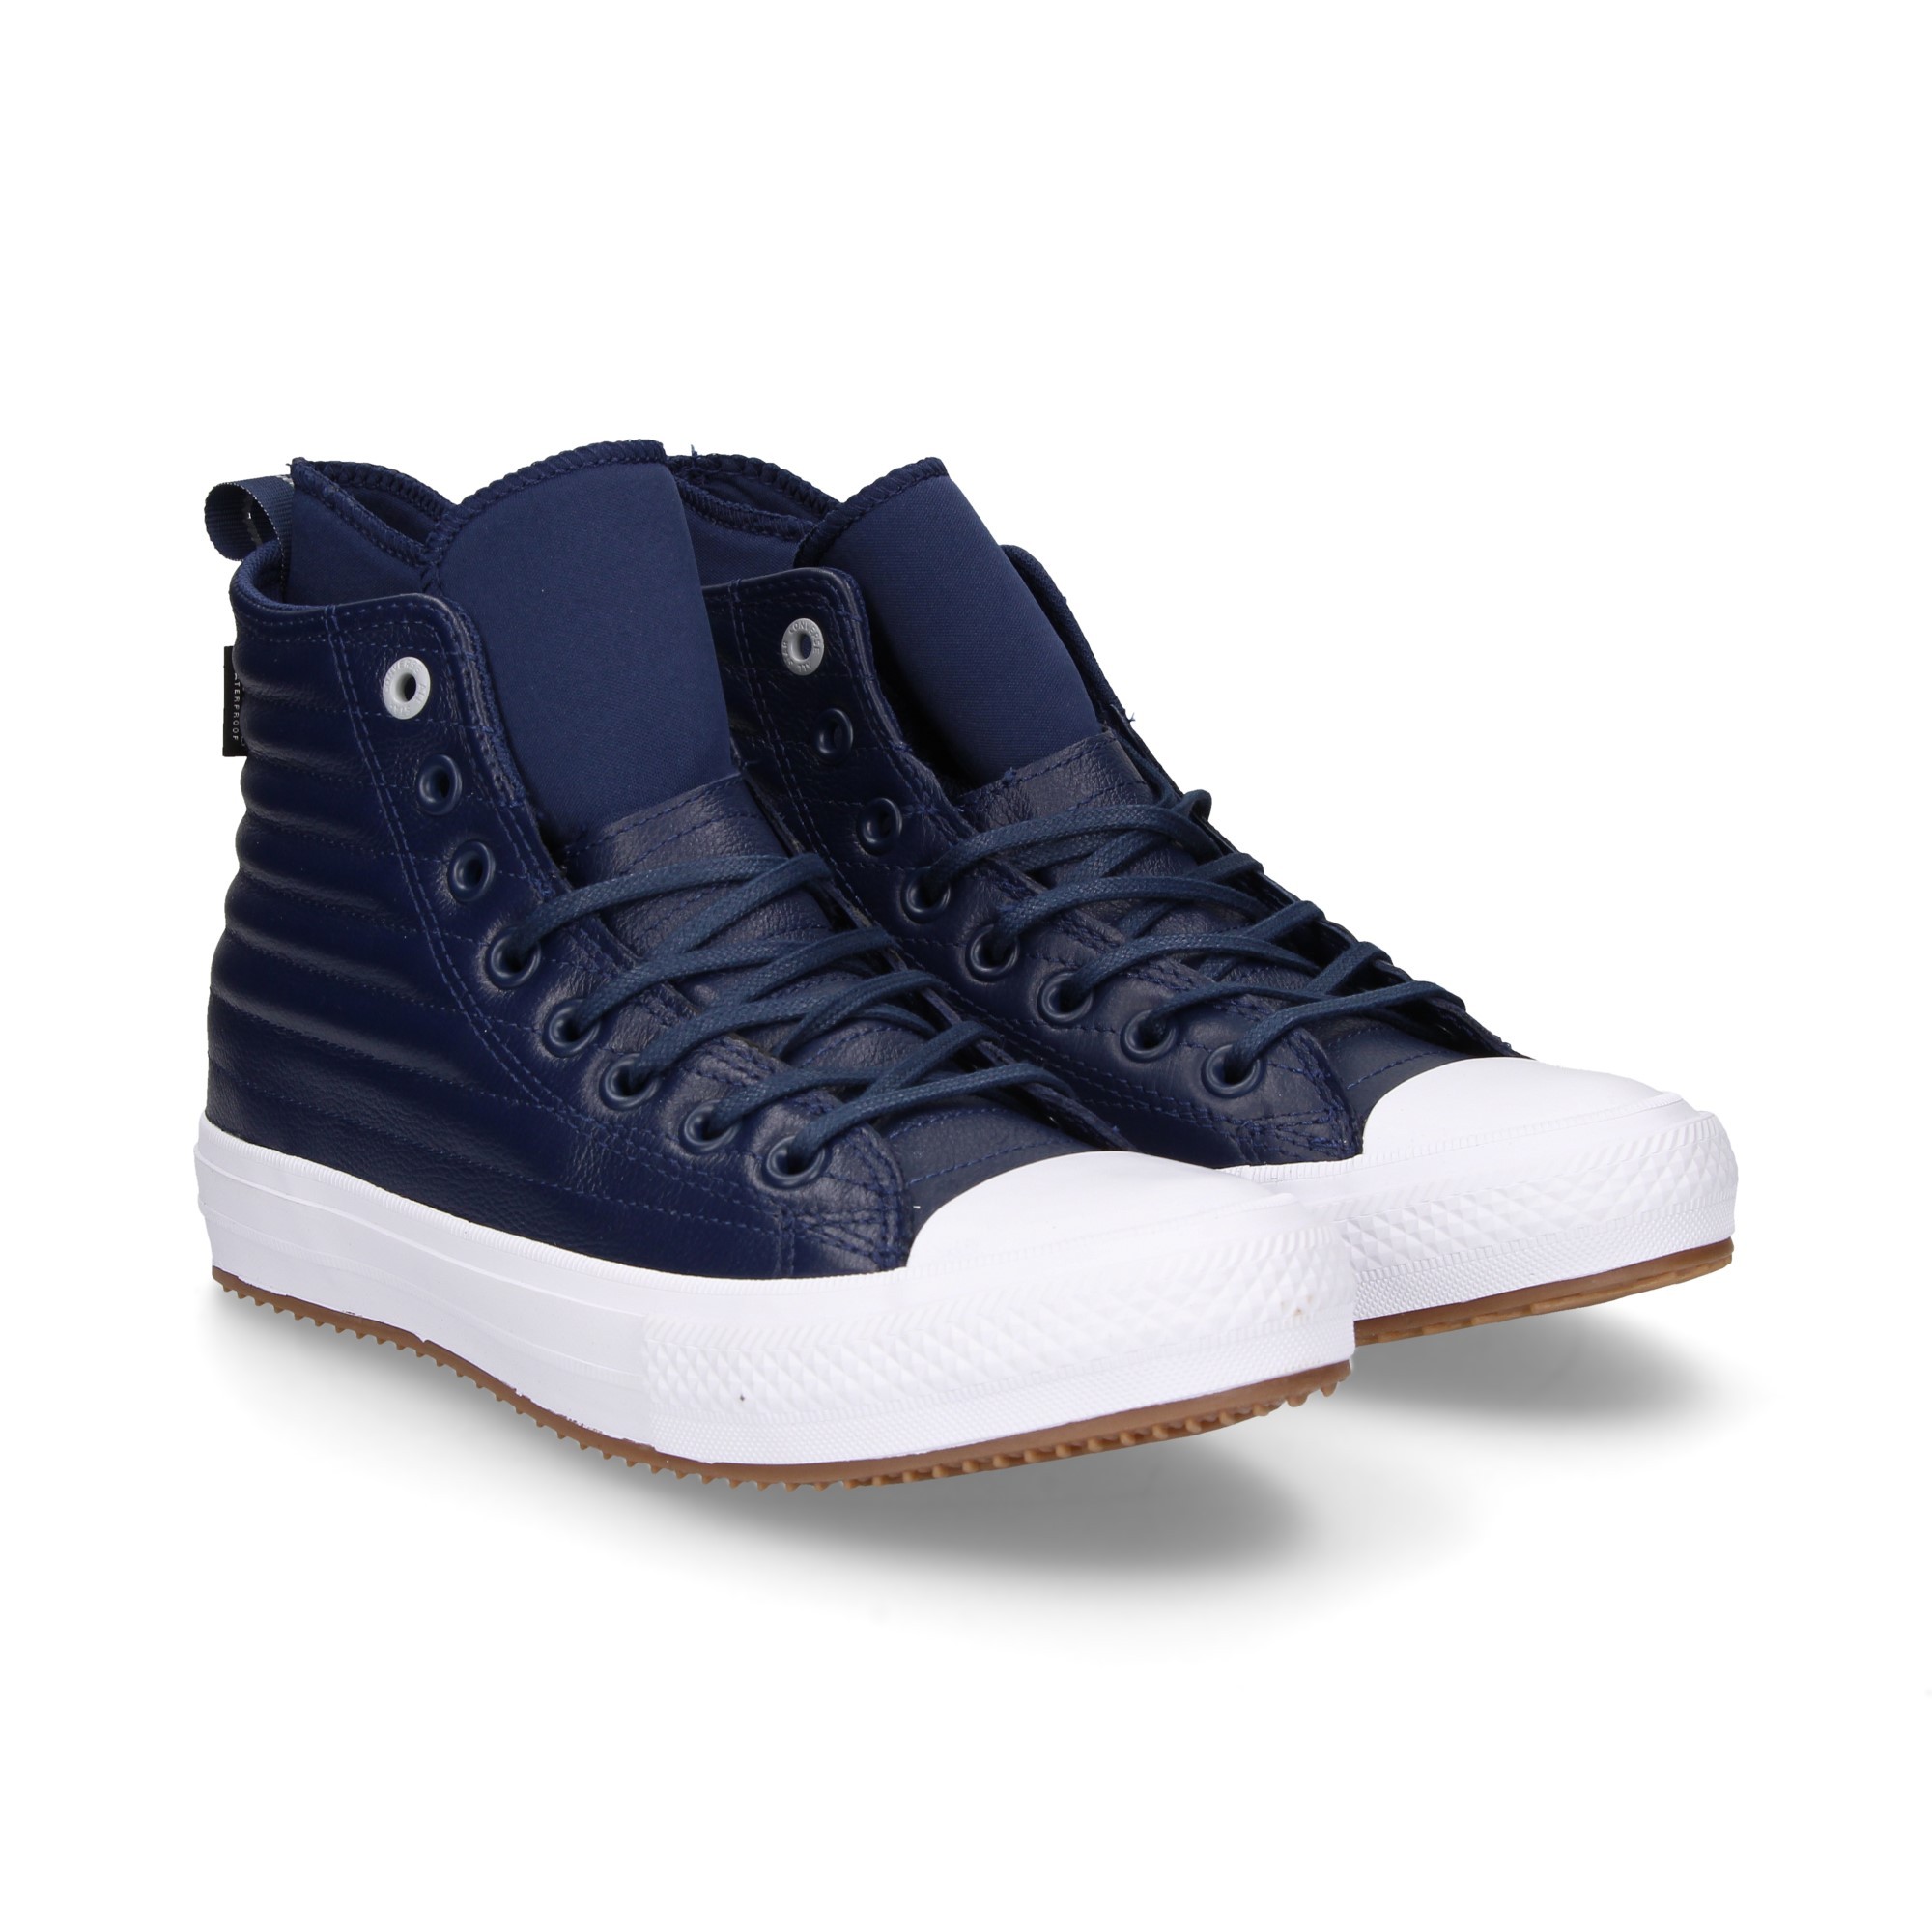 BOOTIN ALL STAR BLUE LEATHER